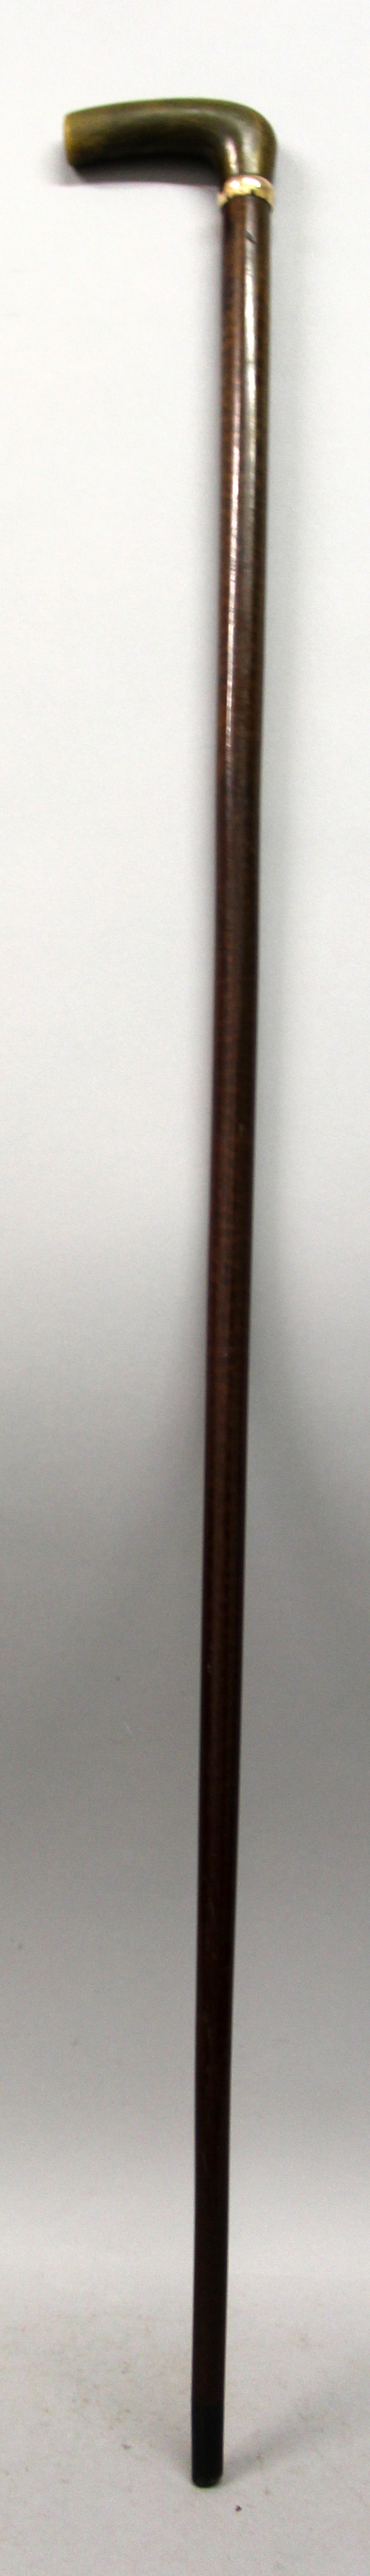 A FINE QUALITY RHINOCEROS HORN HANDLED SNAKE WOOD WALKING STICK, with a monogram engraved gilt-metal - Image 2 of 8